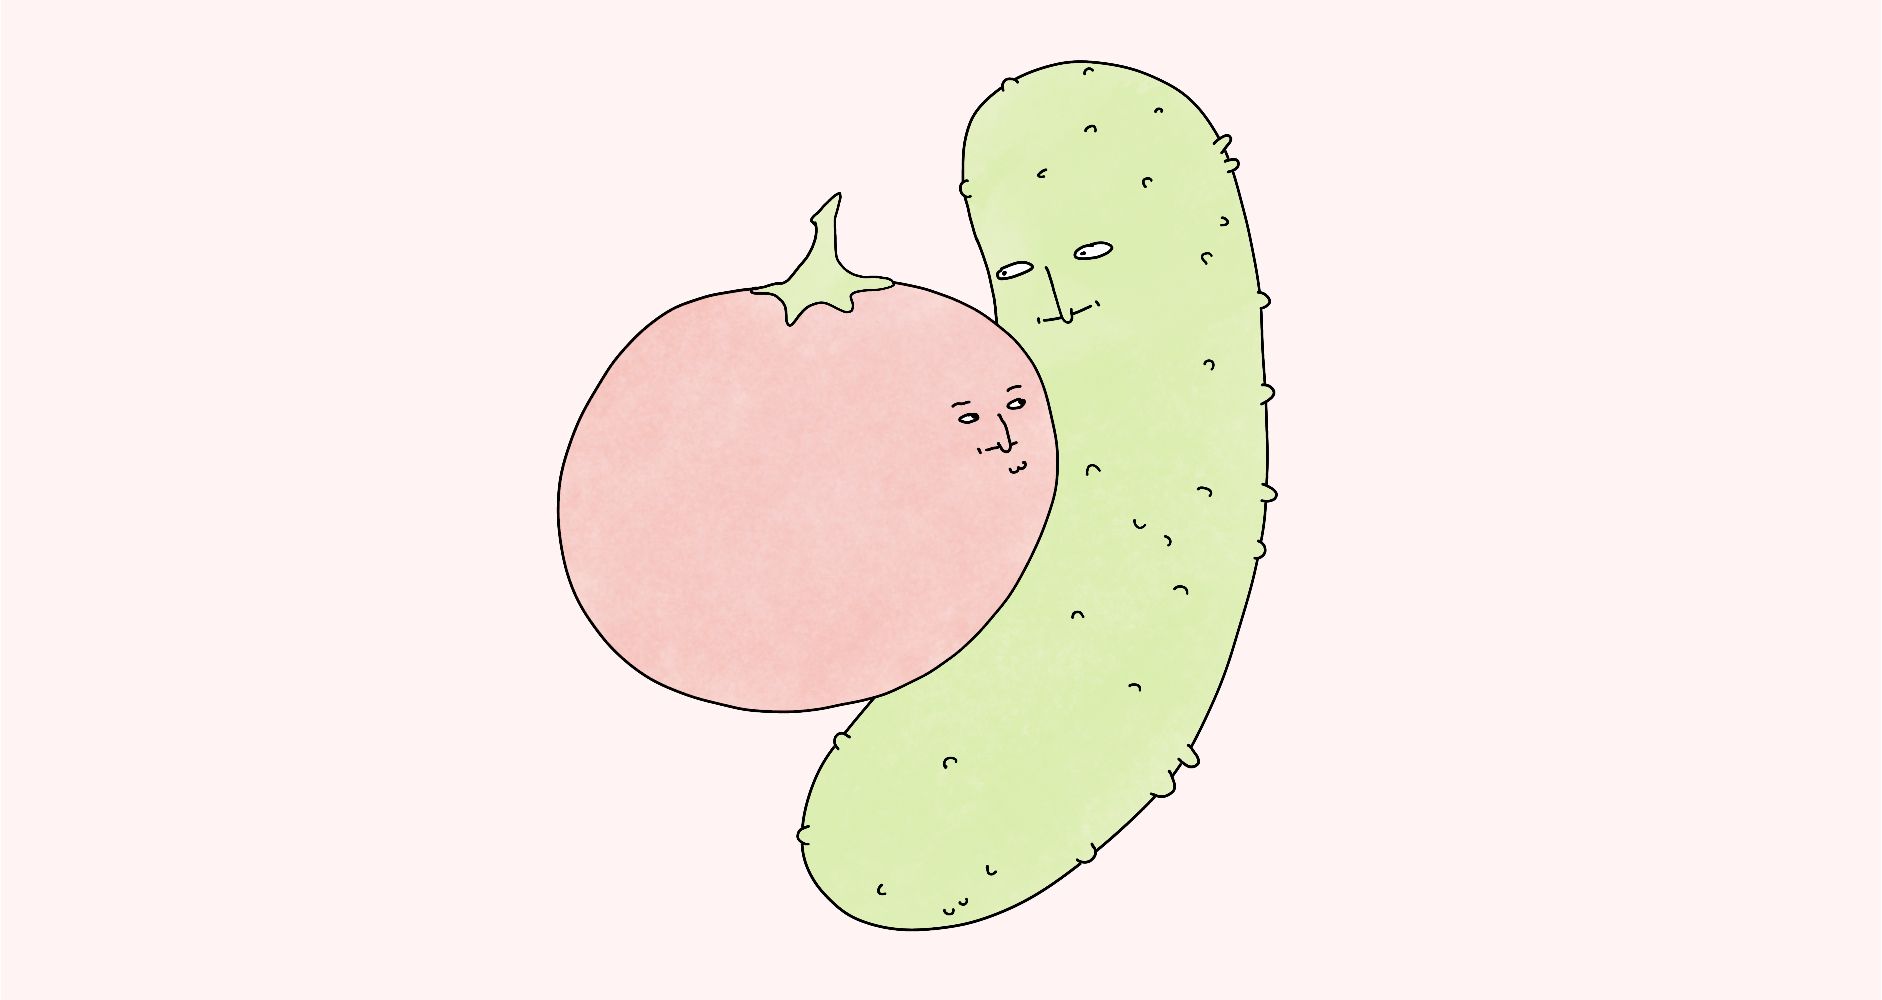 A pickle and a tomato in a warm embrace